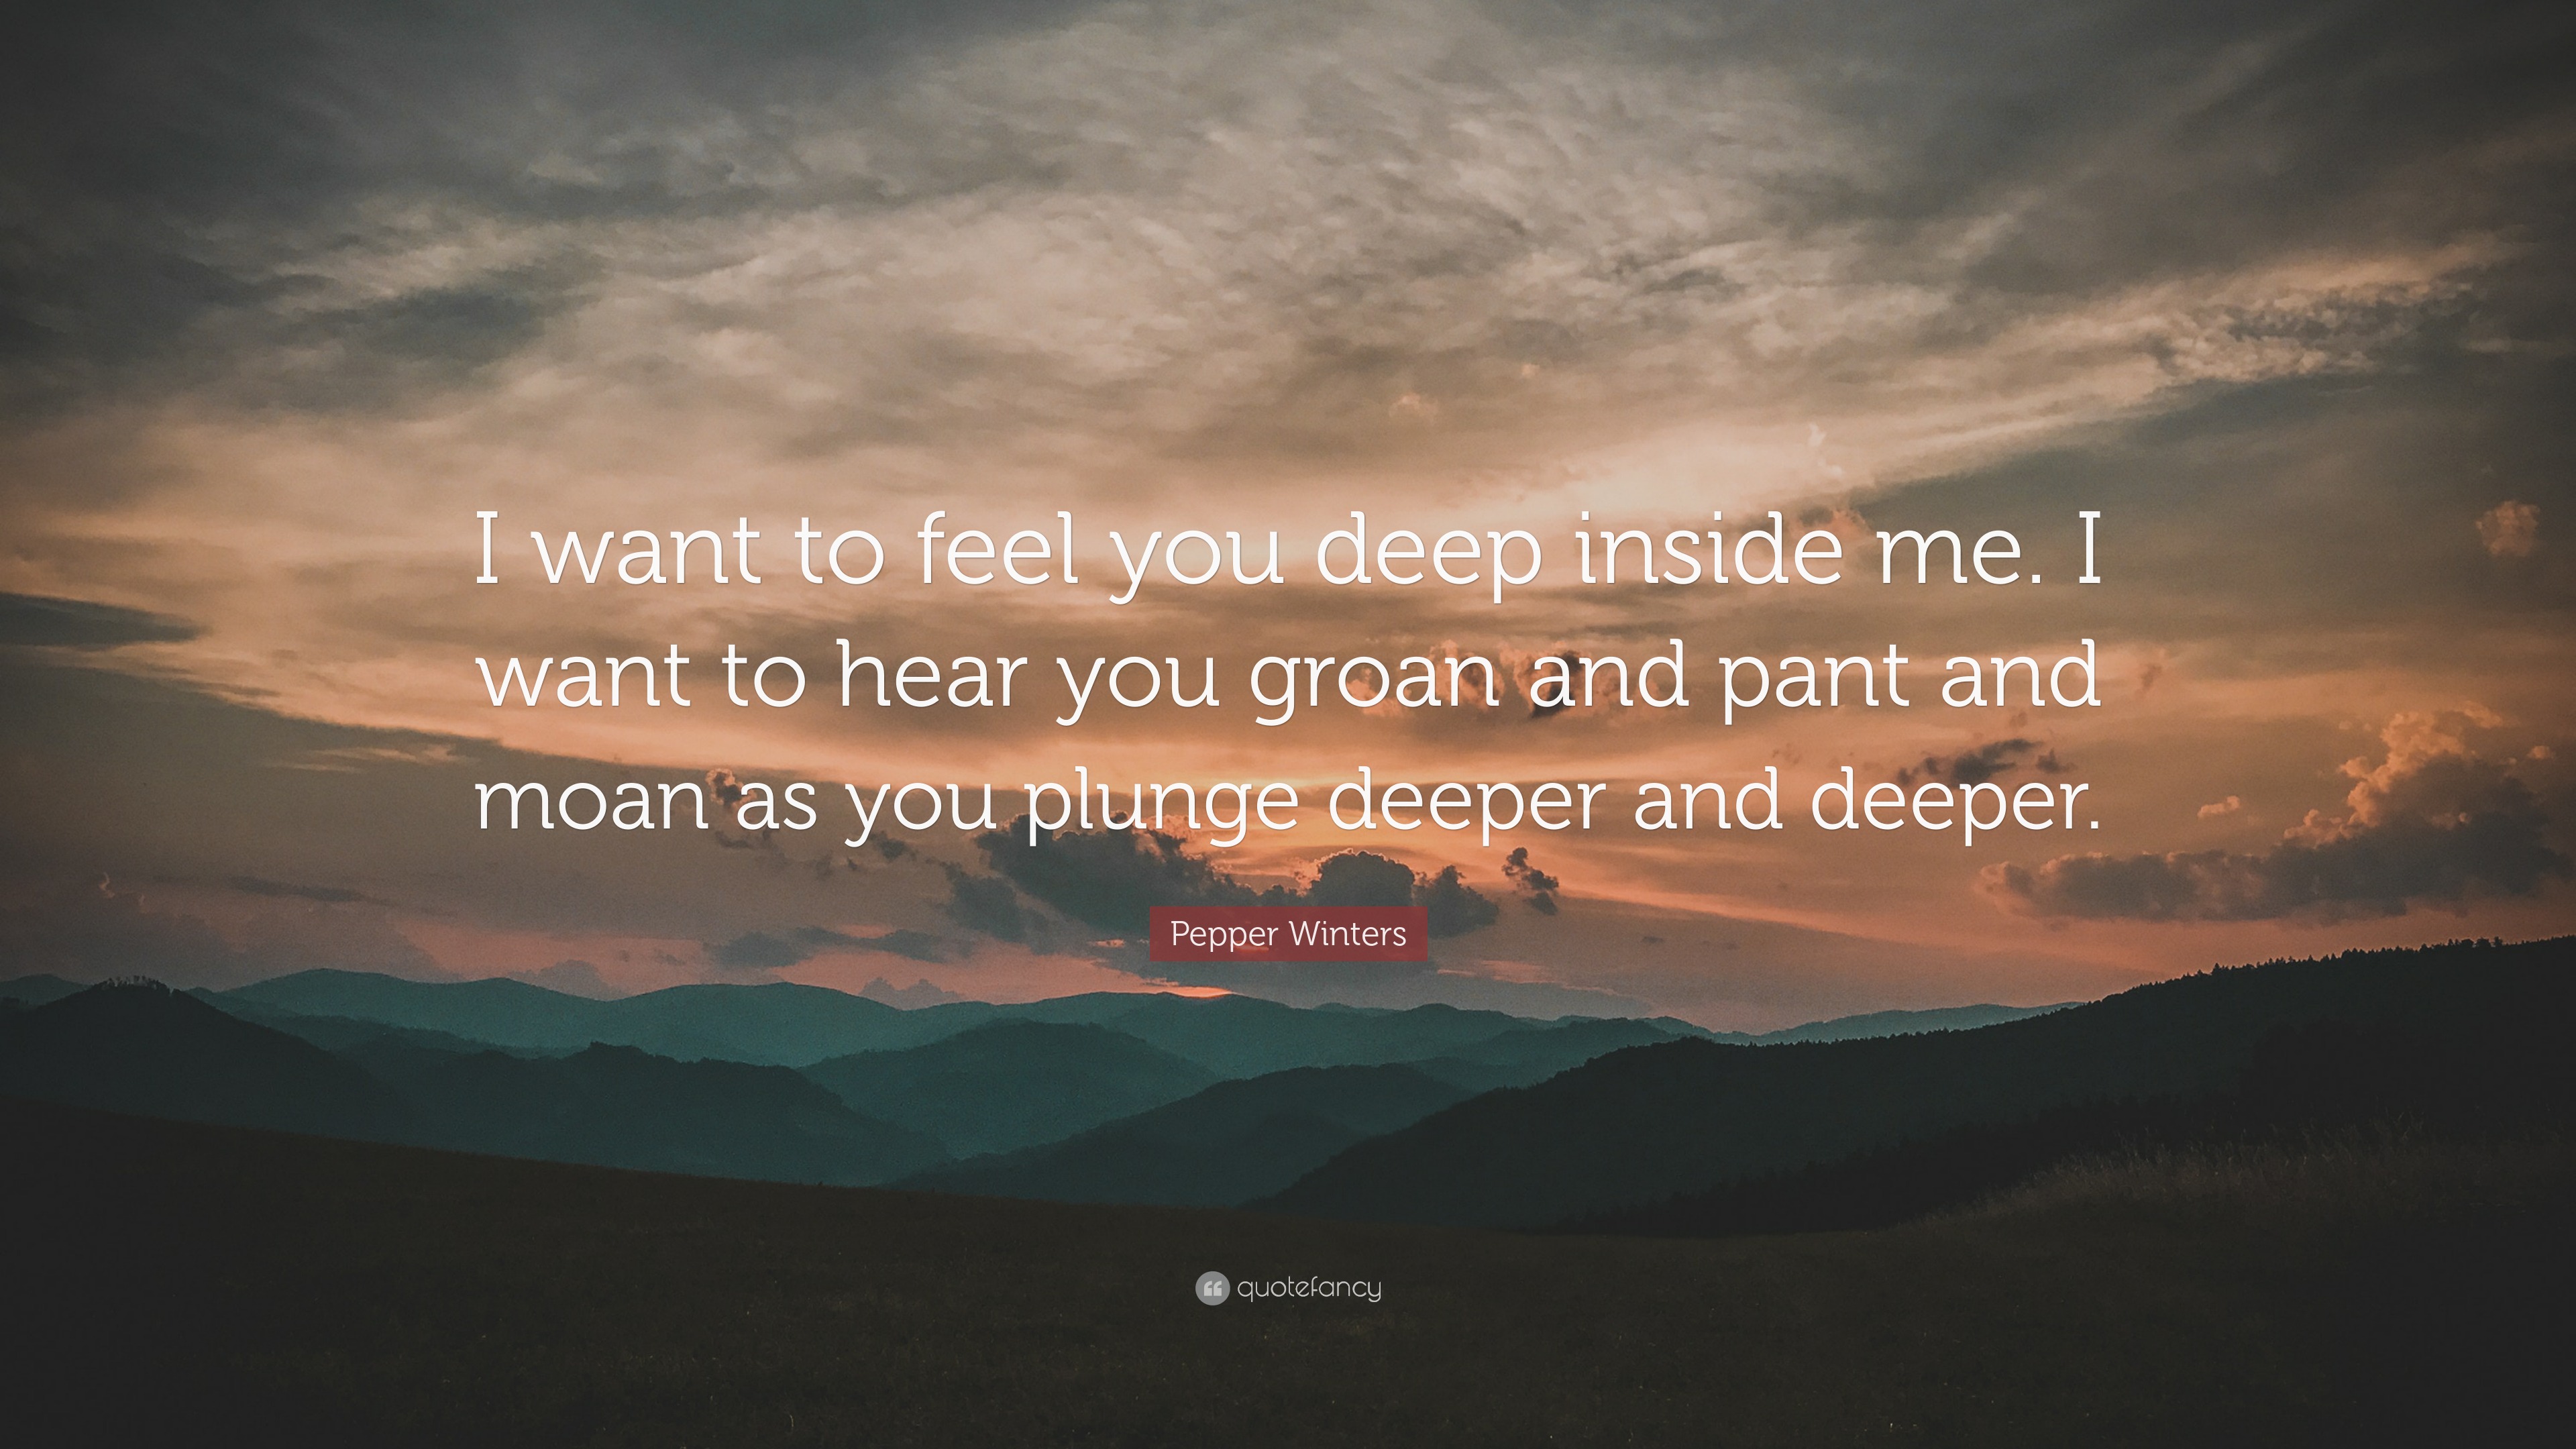 Pepper Winters Quote “i Want To Feel You Deep Inside Me I Want To Hear You Groan And Pant And